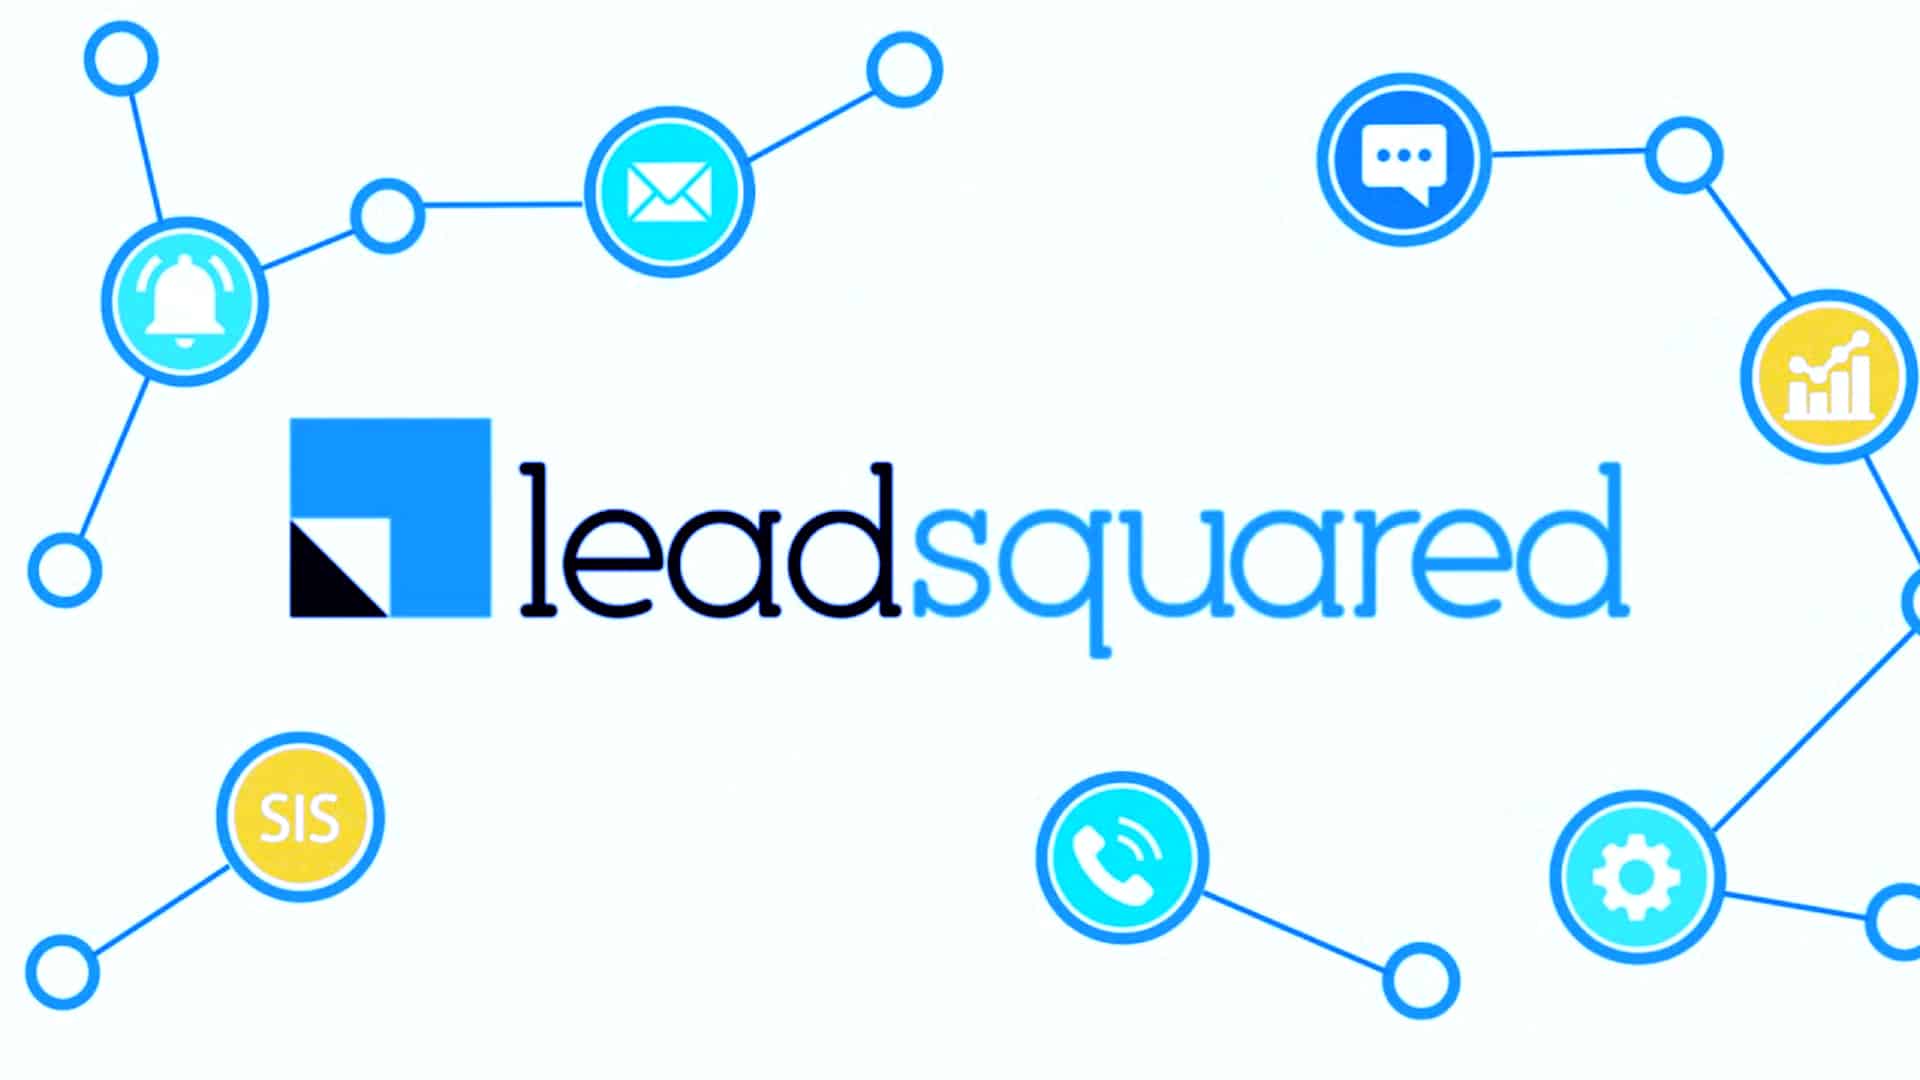 LeadSquared raises Rs 240 cr in funding round led by Gaja Capital